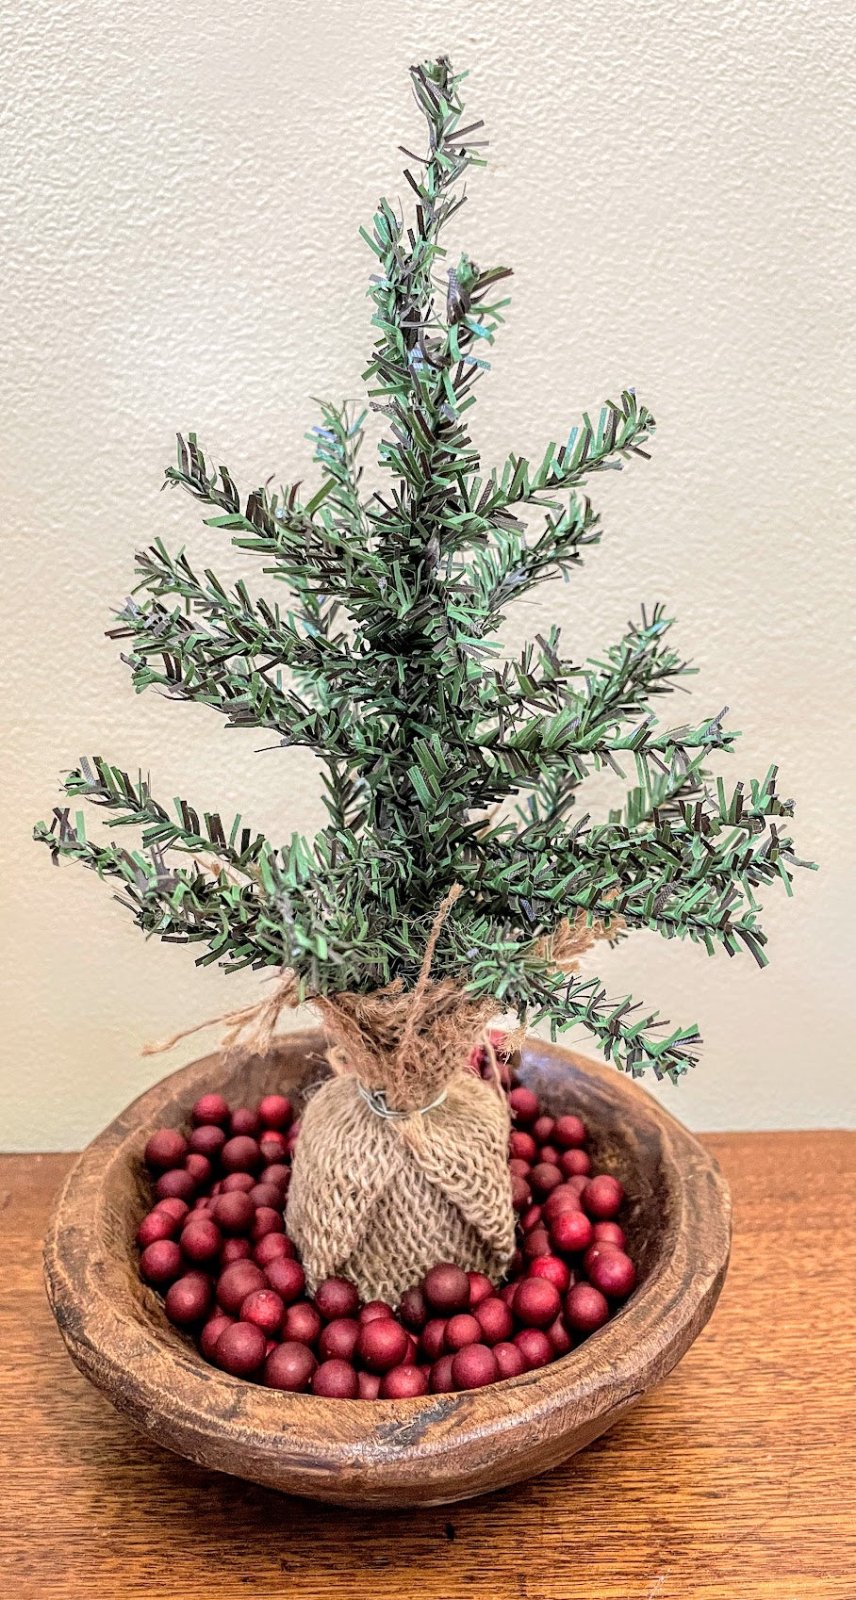 Primitive Christmas Farmhouse Hand Carved Wood Bowl w/ Pine Tree and Berries - The Primitive Pineapple Collection